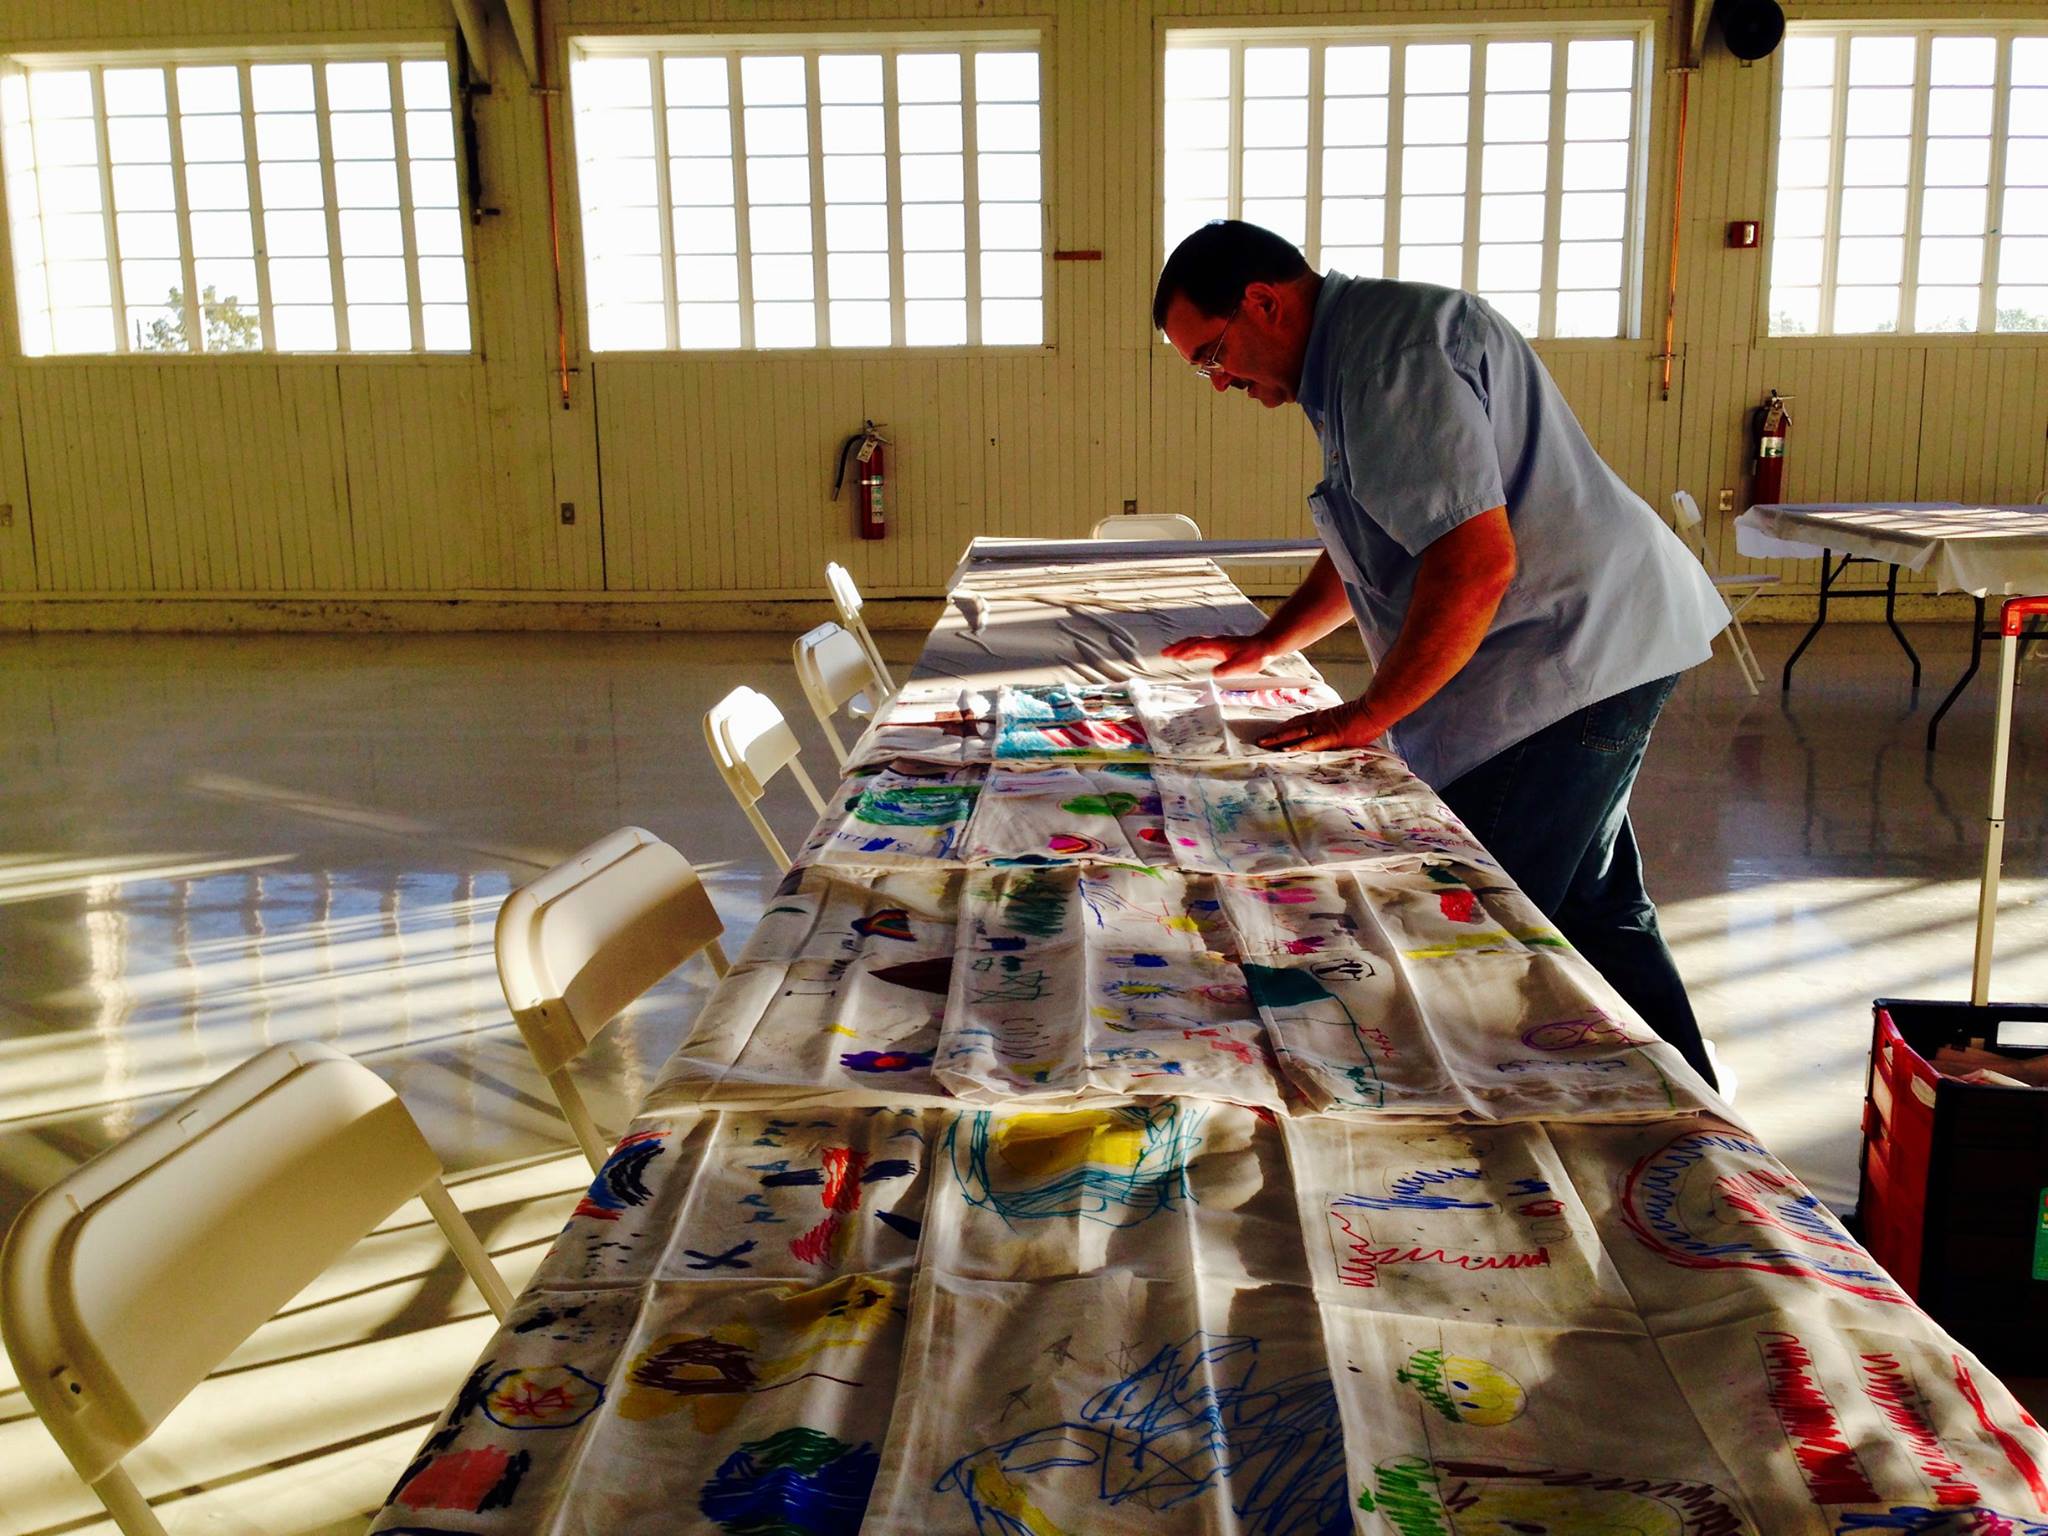 Operation Pillow Talk staff lay out pillowcases decorated by local schoolchildren